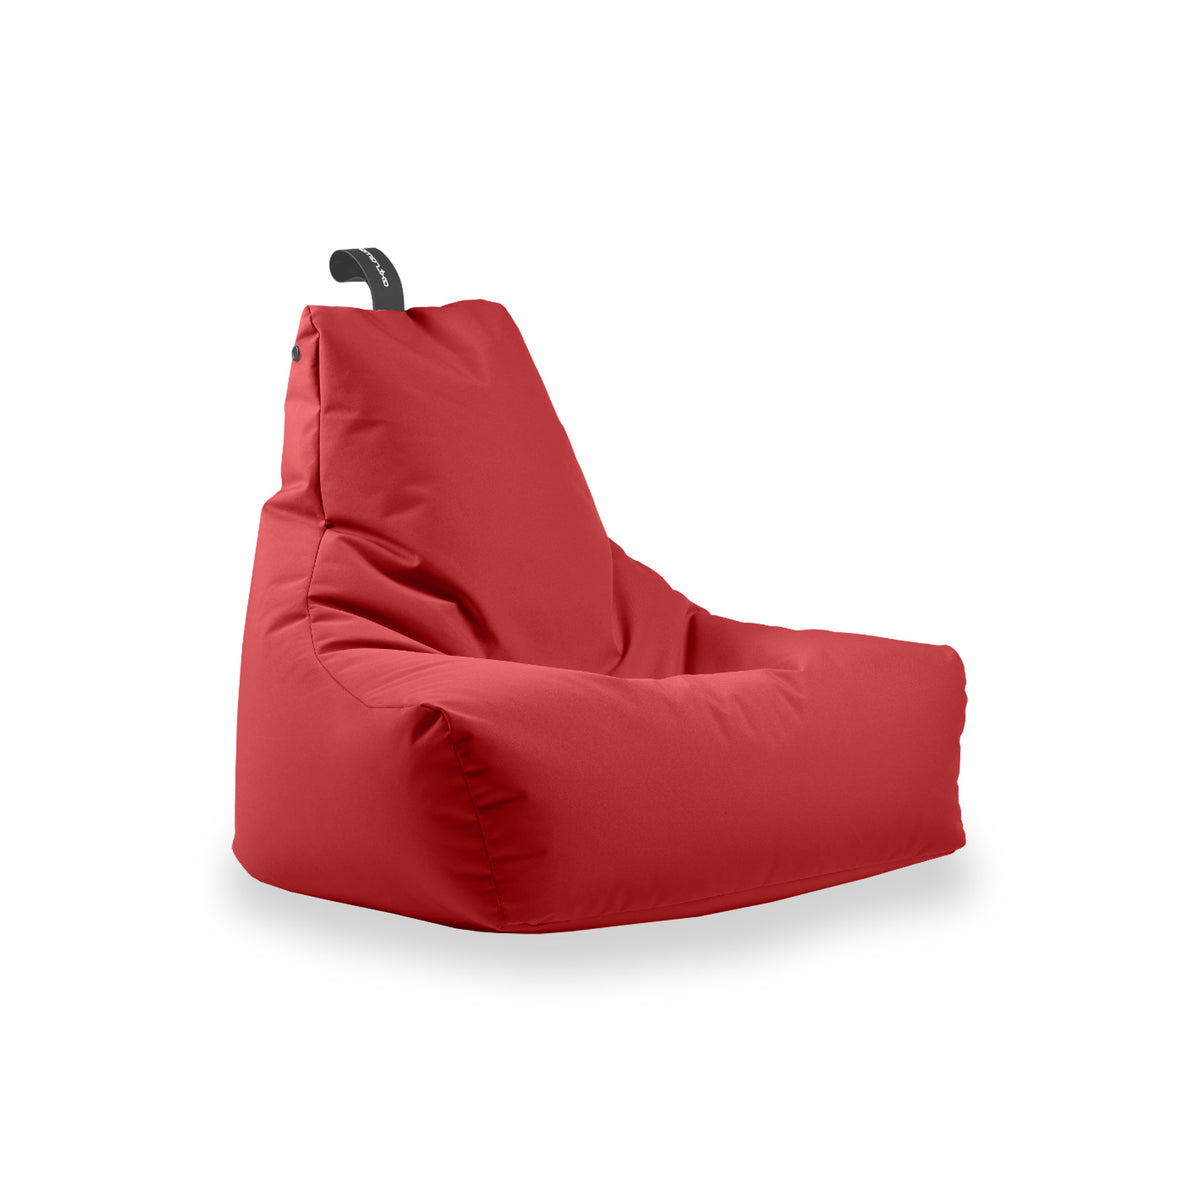 Mighty B Beanbag in Red from Roseland Furniture